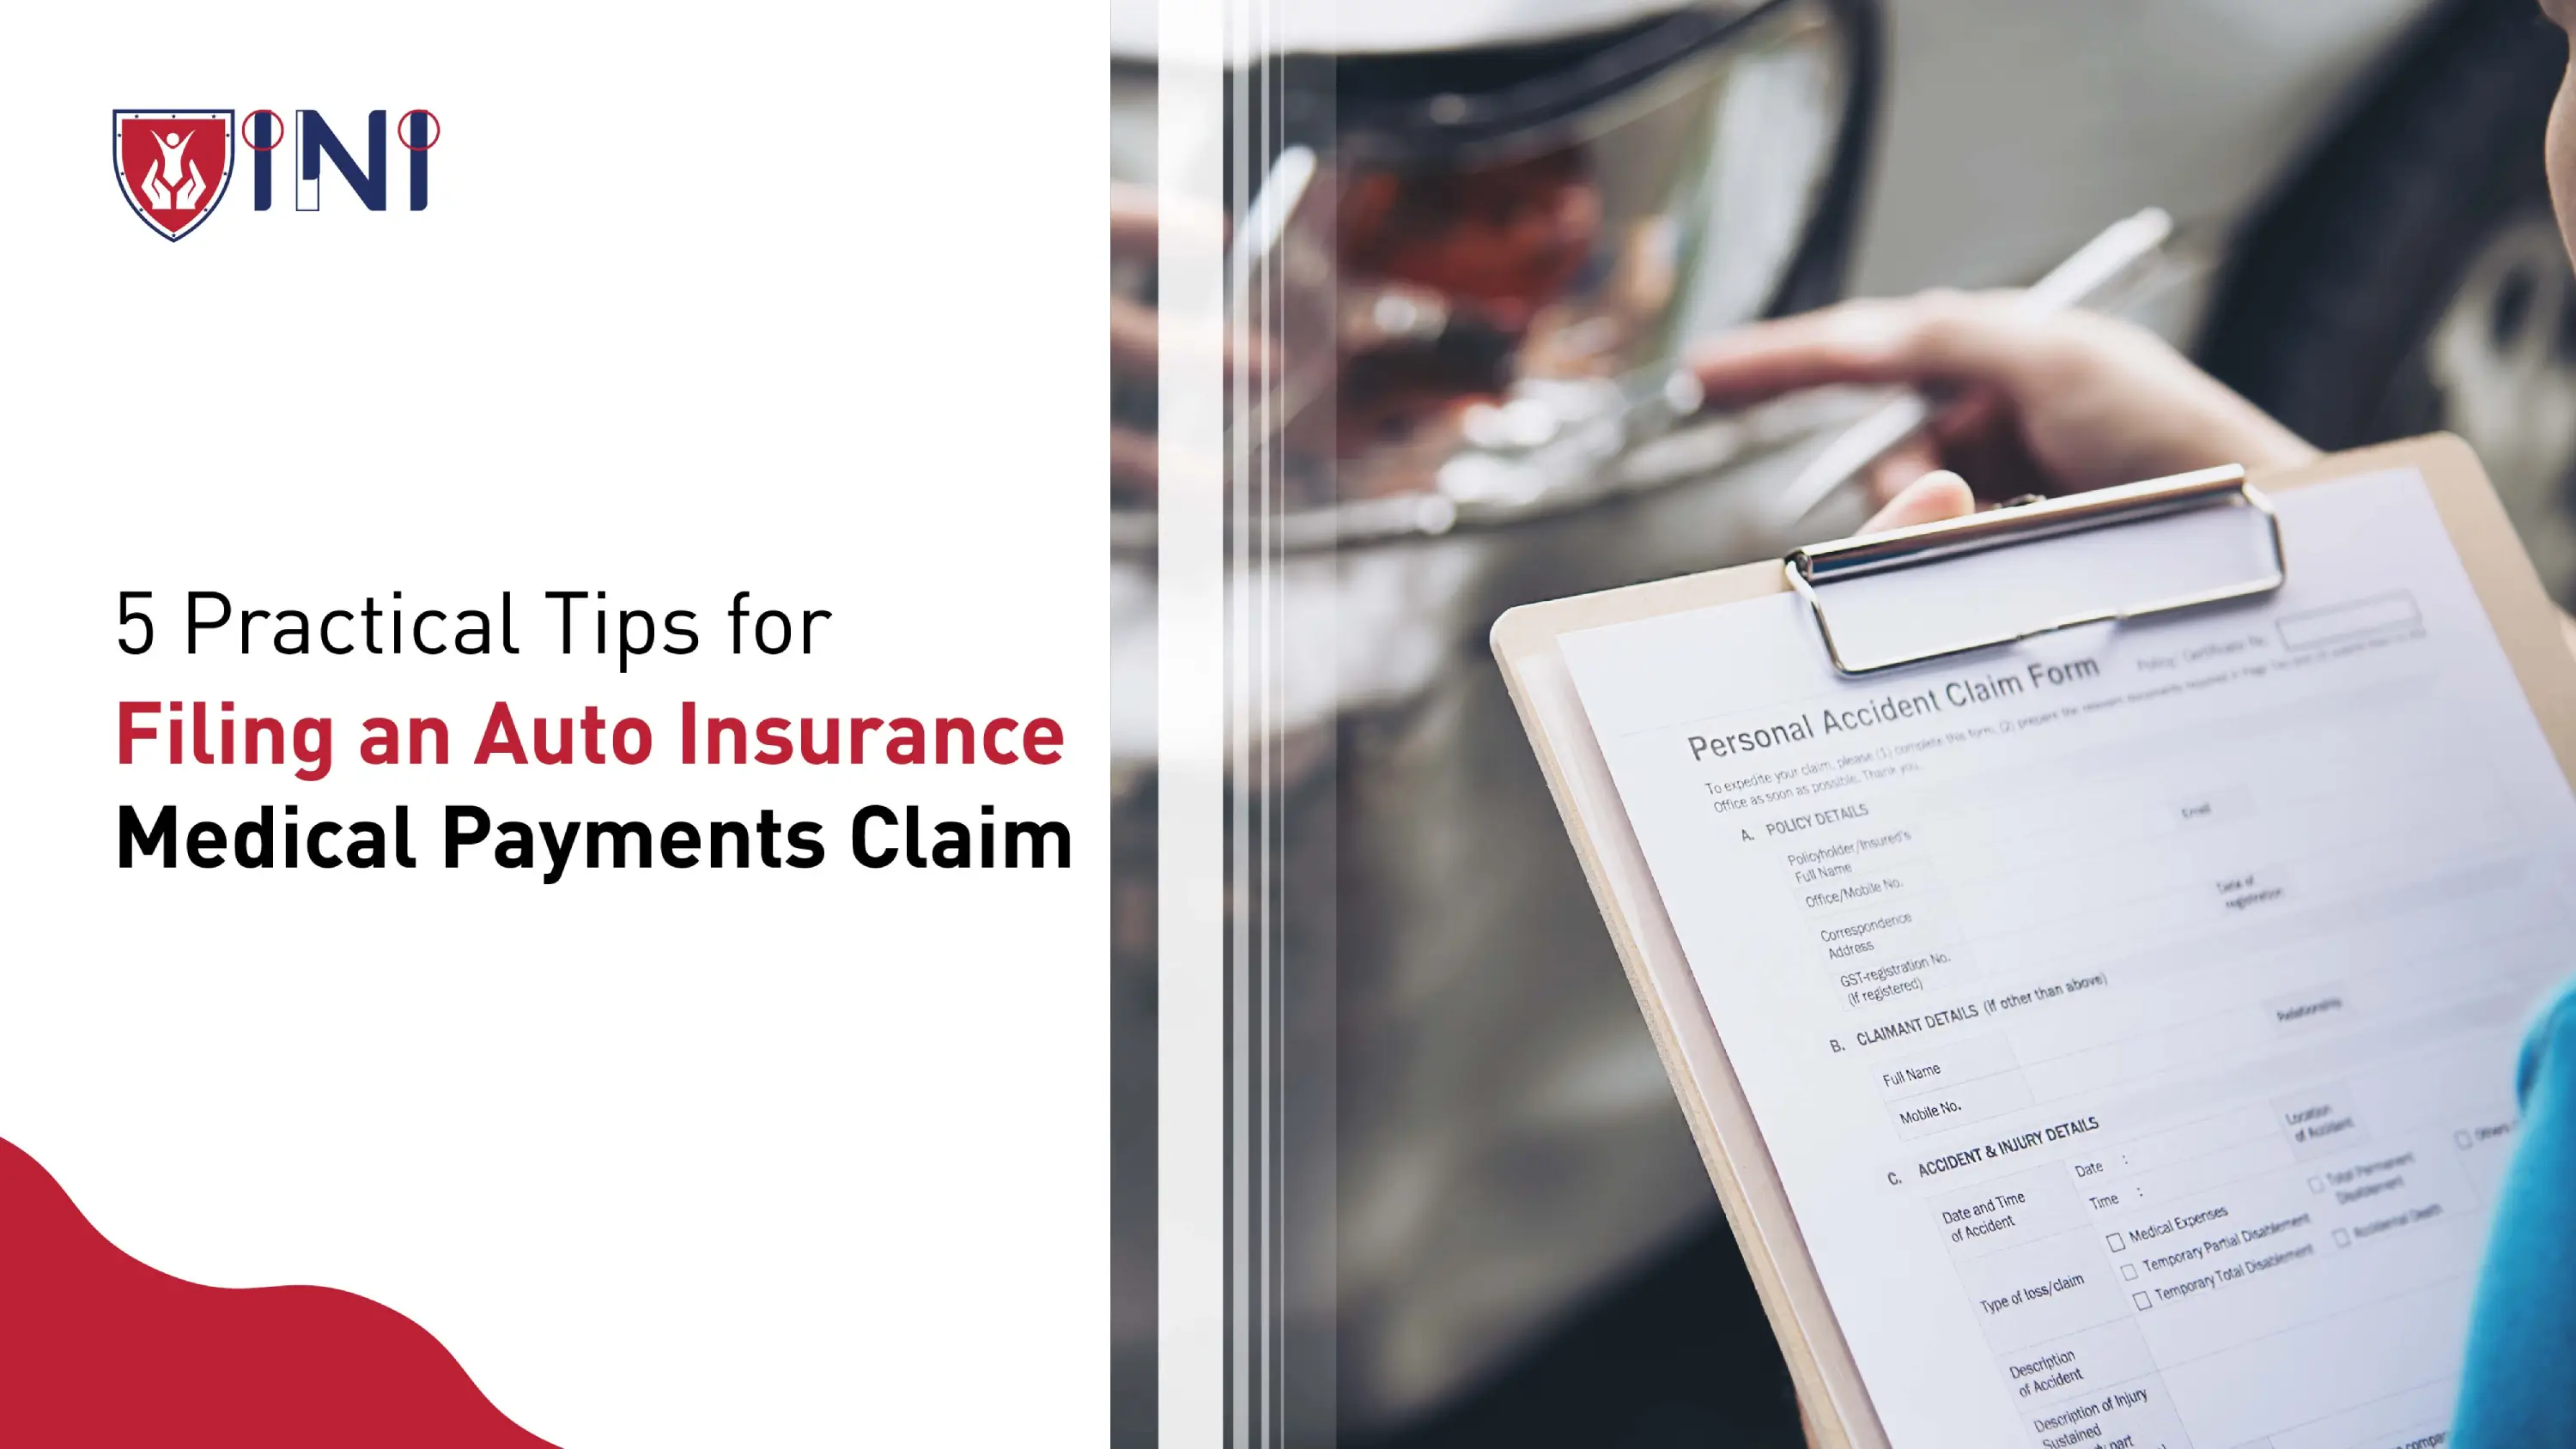 5 Tips for Filing an Auto Insurance Medical Payments Claim